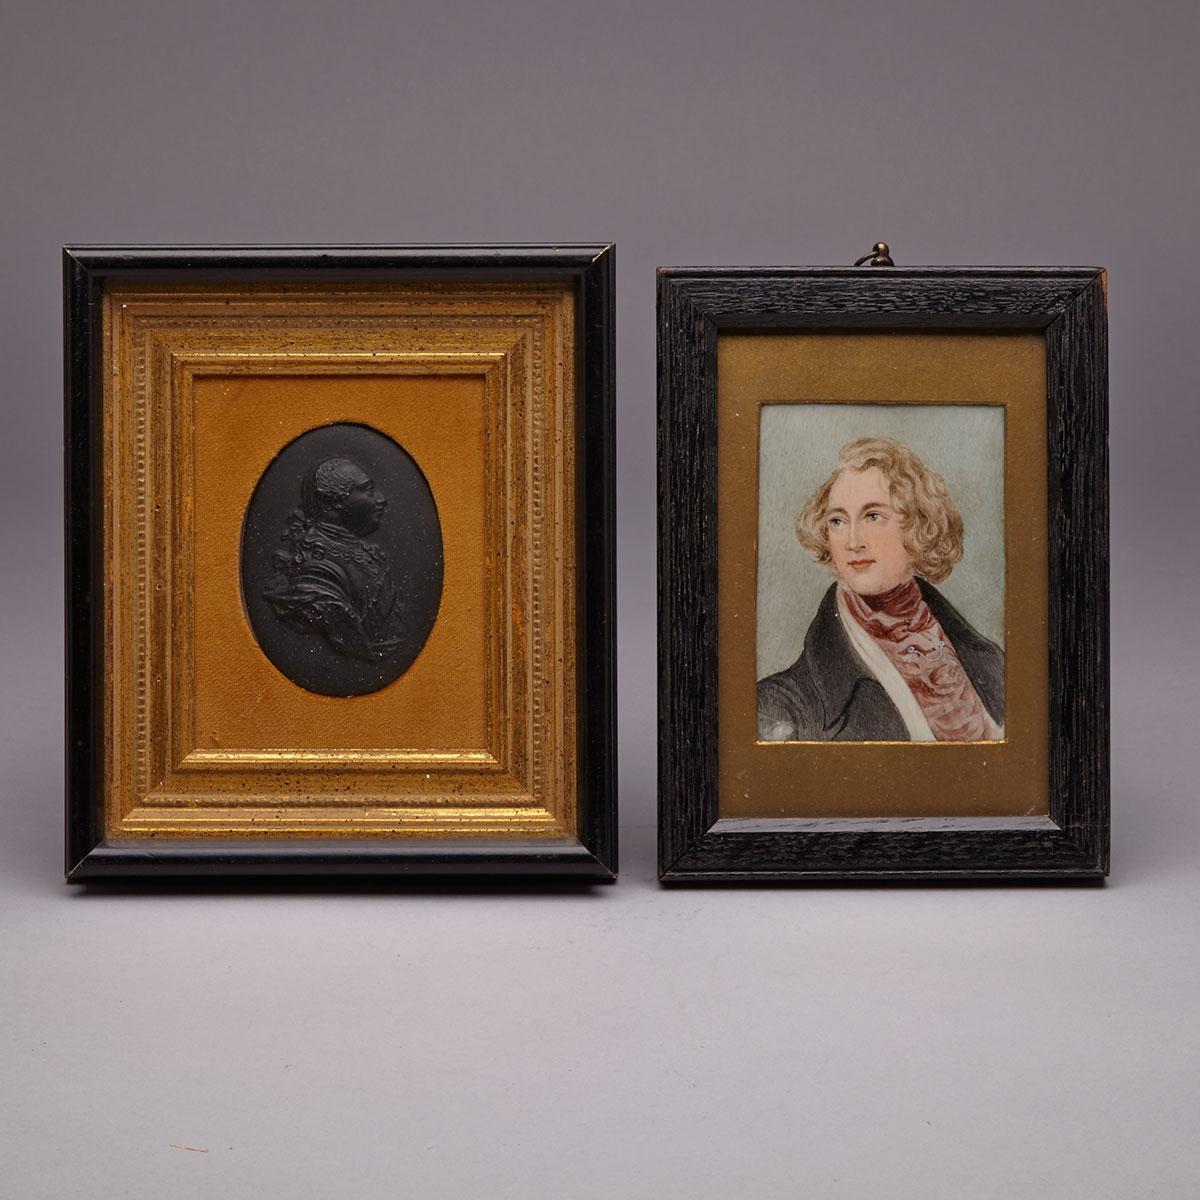 English Portrait Miniature on Ivory of a Young Gentleman, early 19th century and a Plaster Relief Oval of George III, 20th century